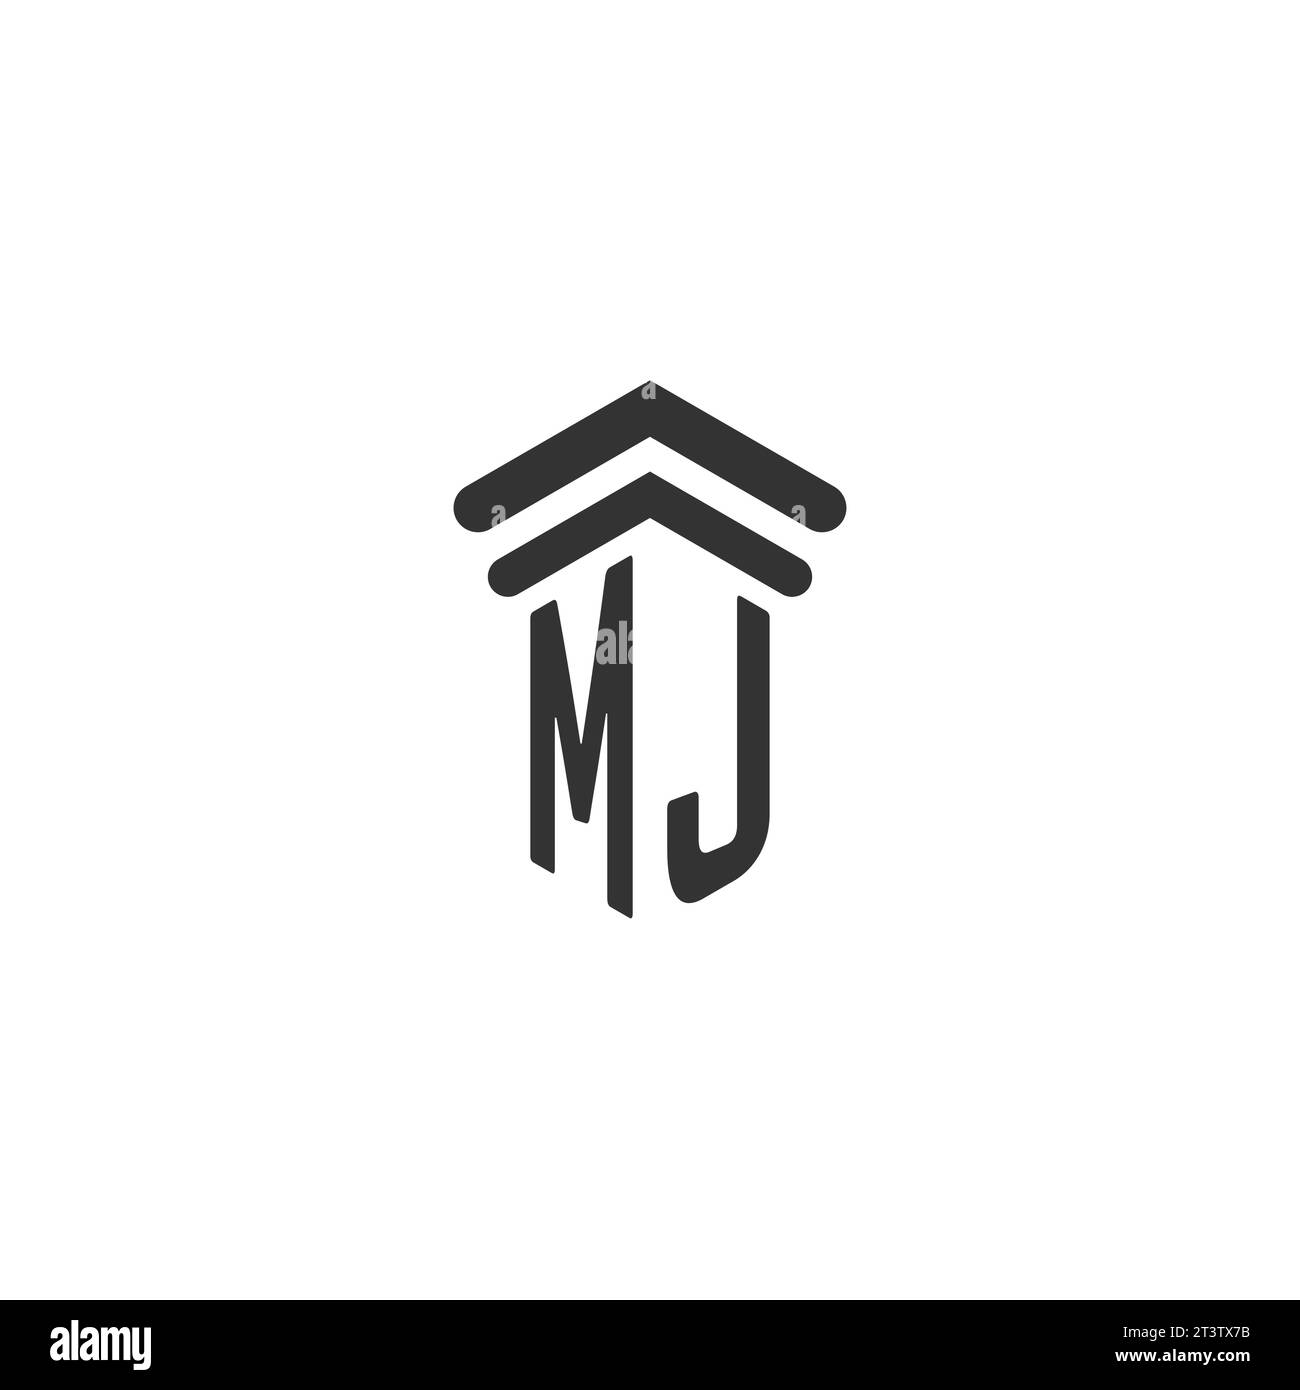 MJ initial for law firm logo design template Stock Vector